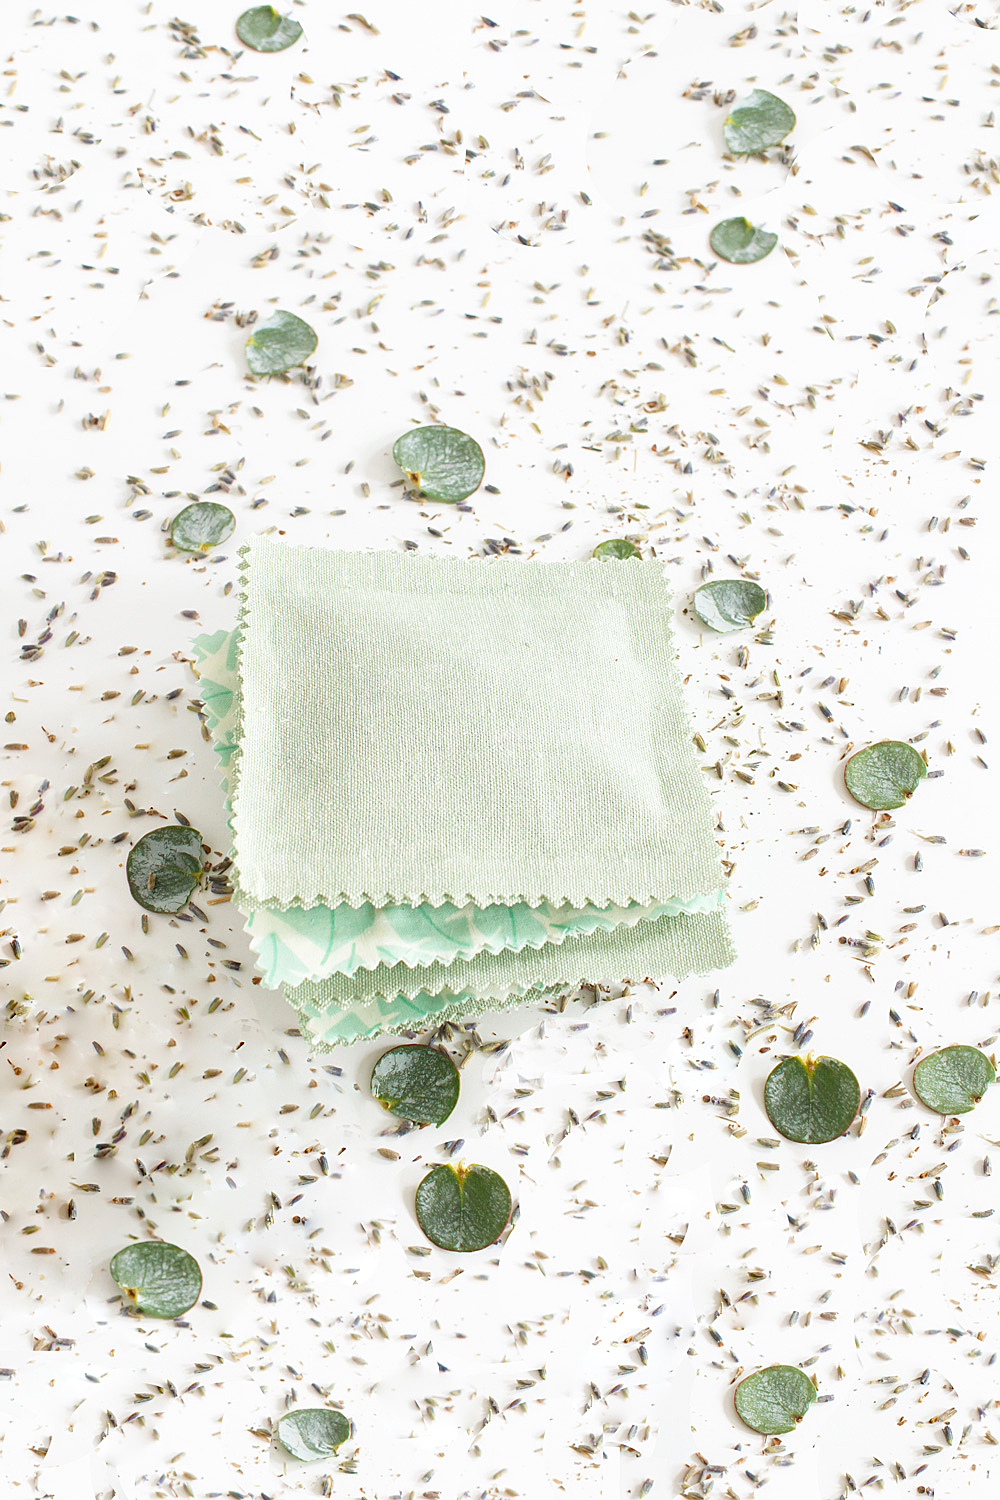 Make these DIY lavender eucalyptus sachets in just 30 minutes using fabric glue!